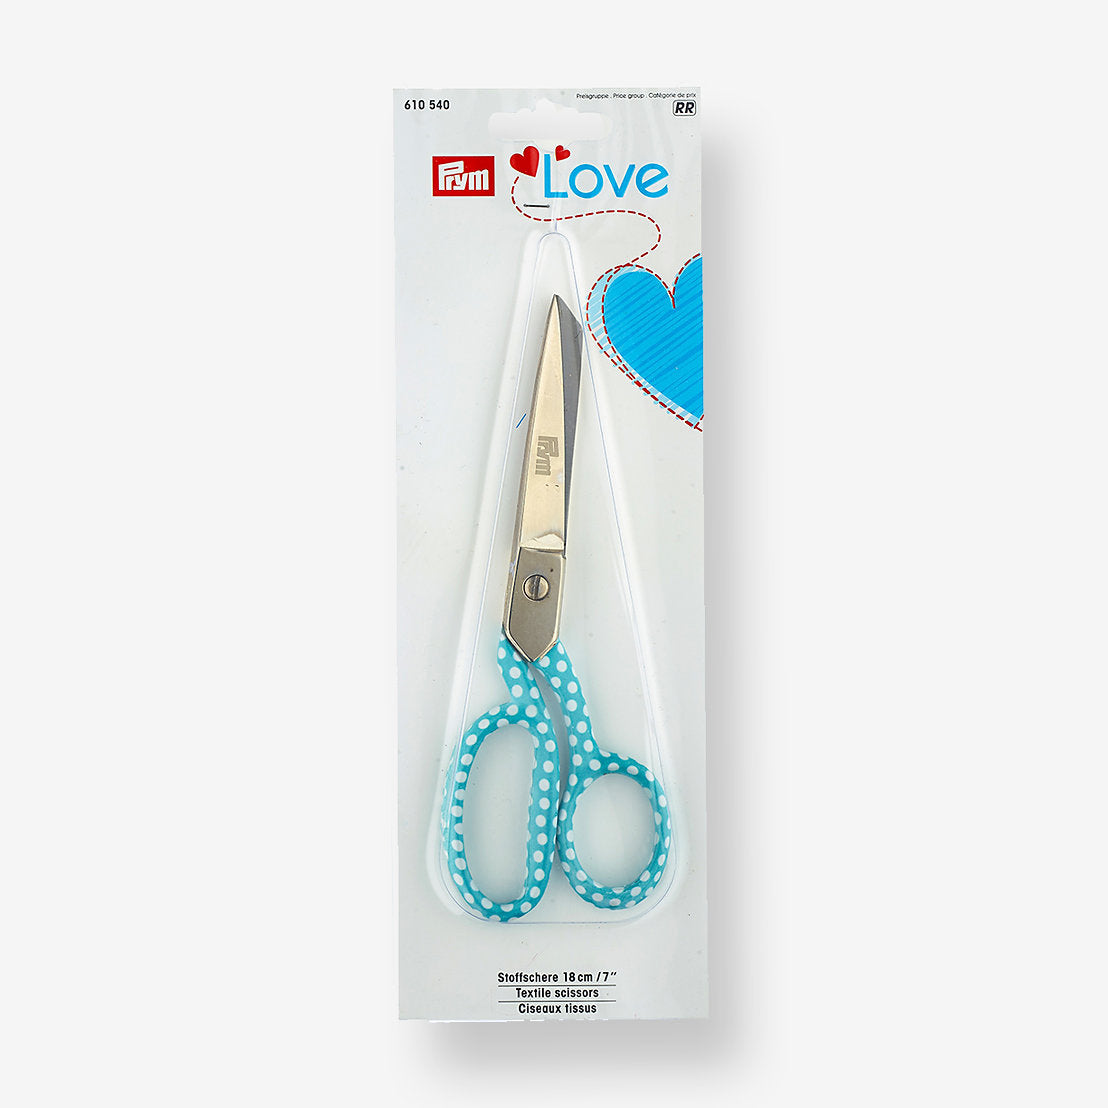 Prym Love 18cm Sewing Scissors - Ideal for cutting fabric and sewing